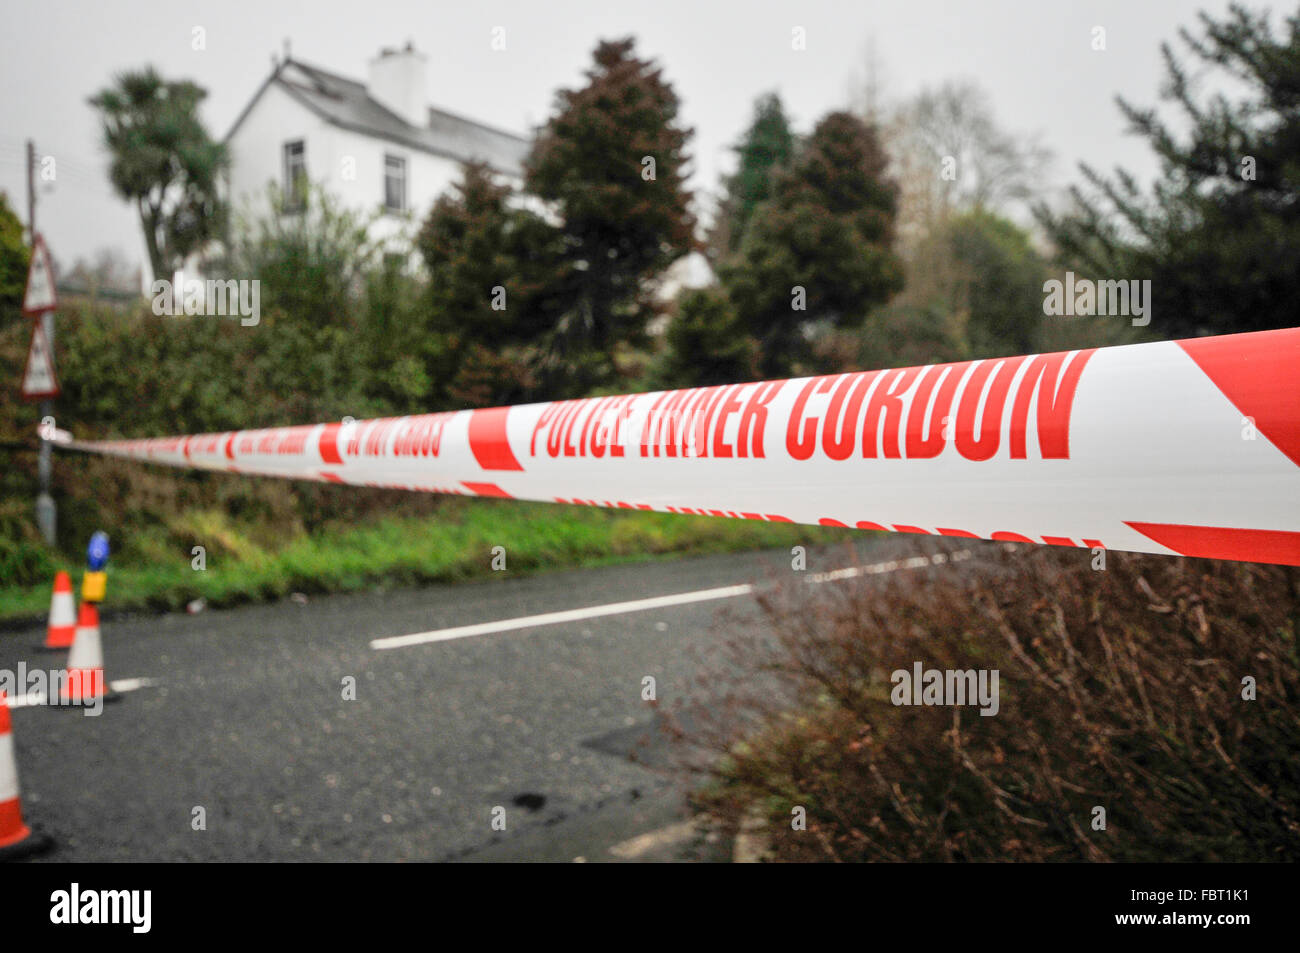 Police 'Inner Cordon' tape is stretched across a road at the scene of a murder investigation. Stock Photo